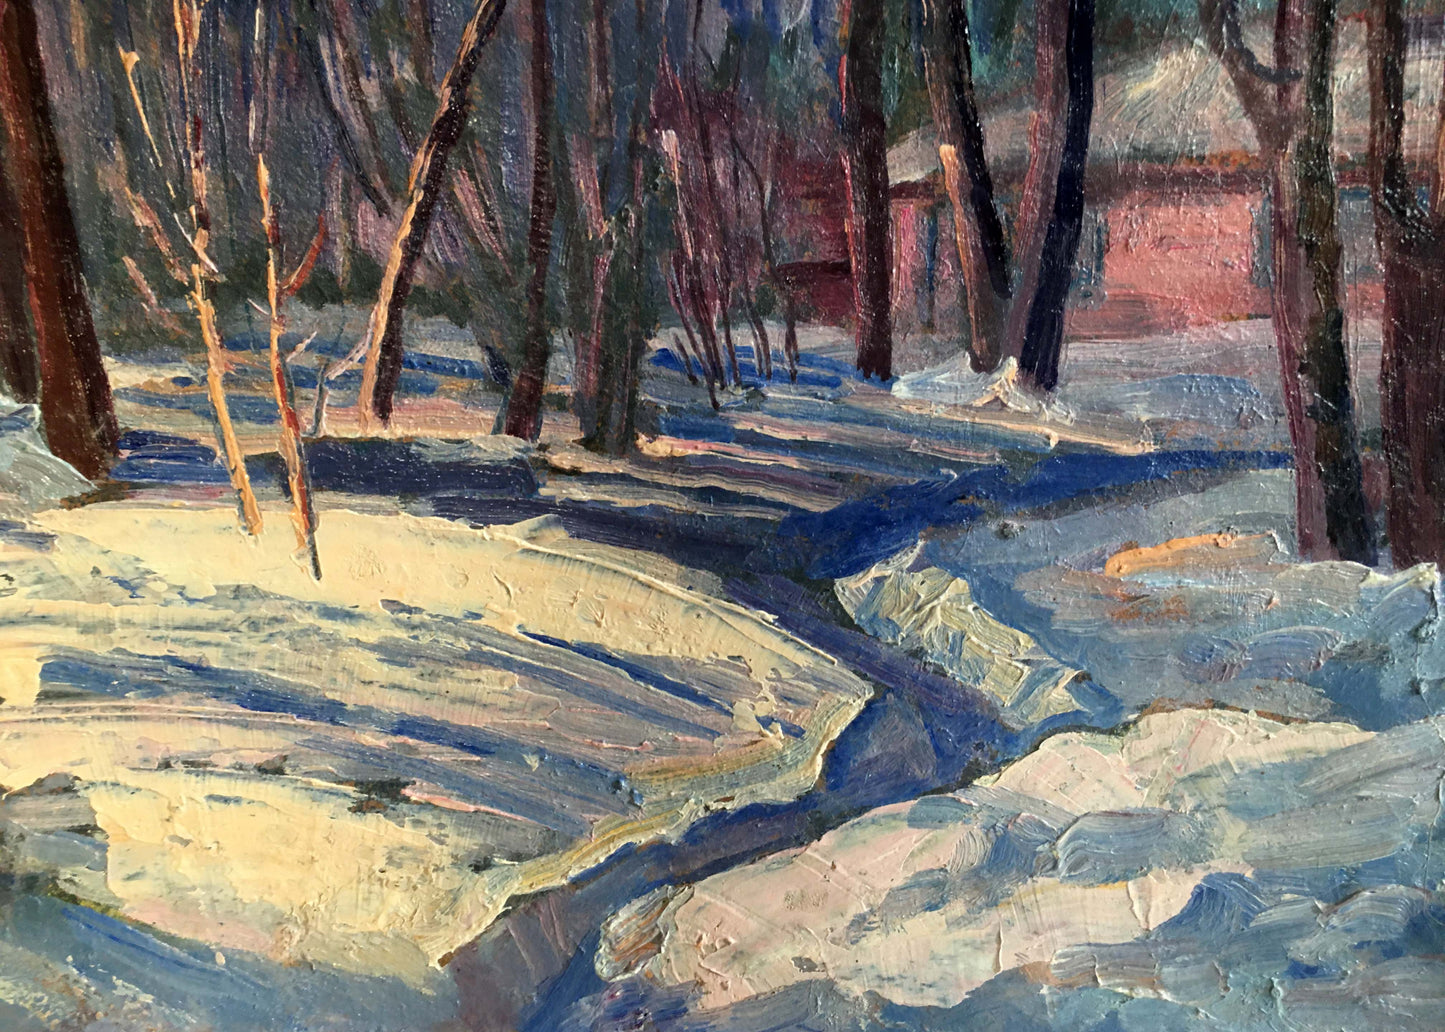 Oil painting Winter forest landscape